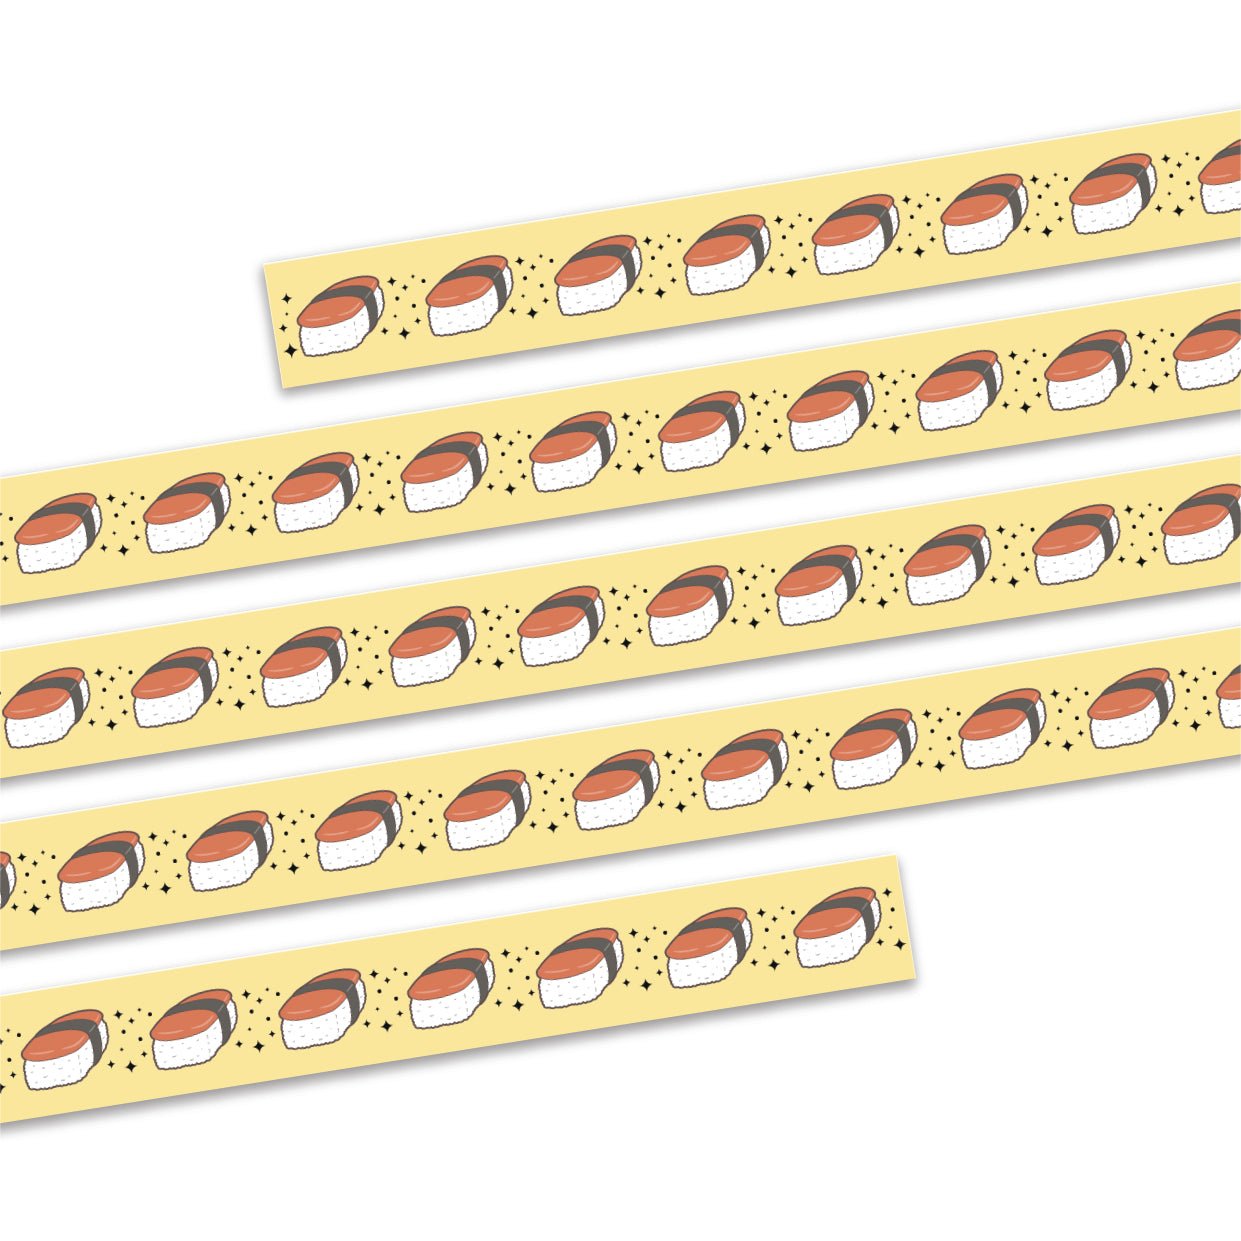 Washi Tape - Lil' Spam Musubi Collection - SumLilThings